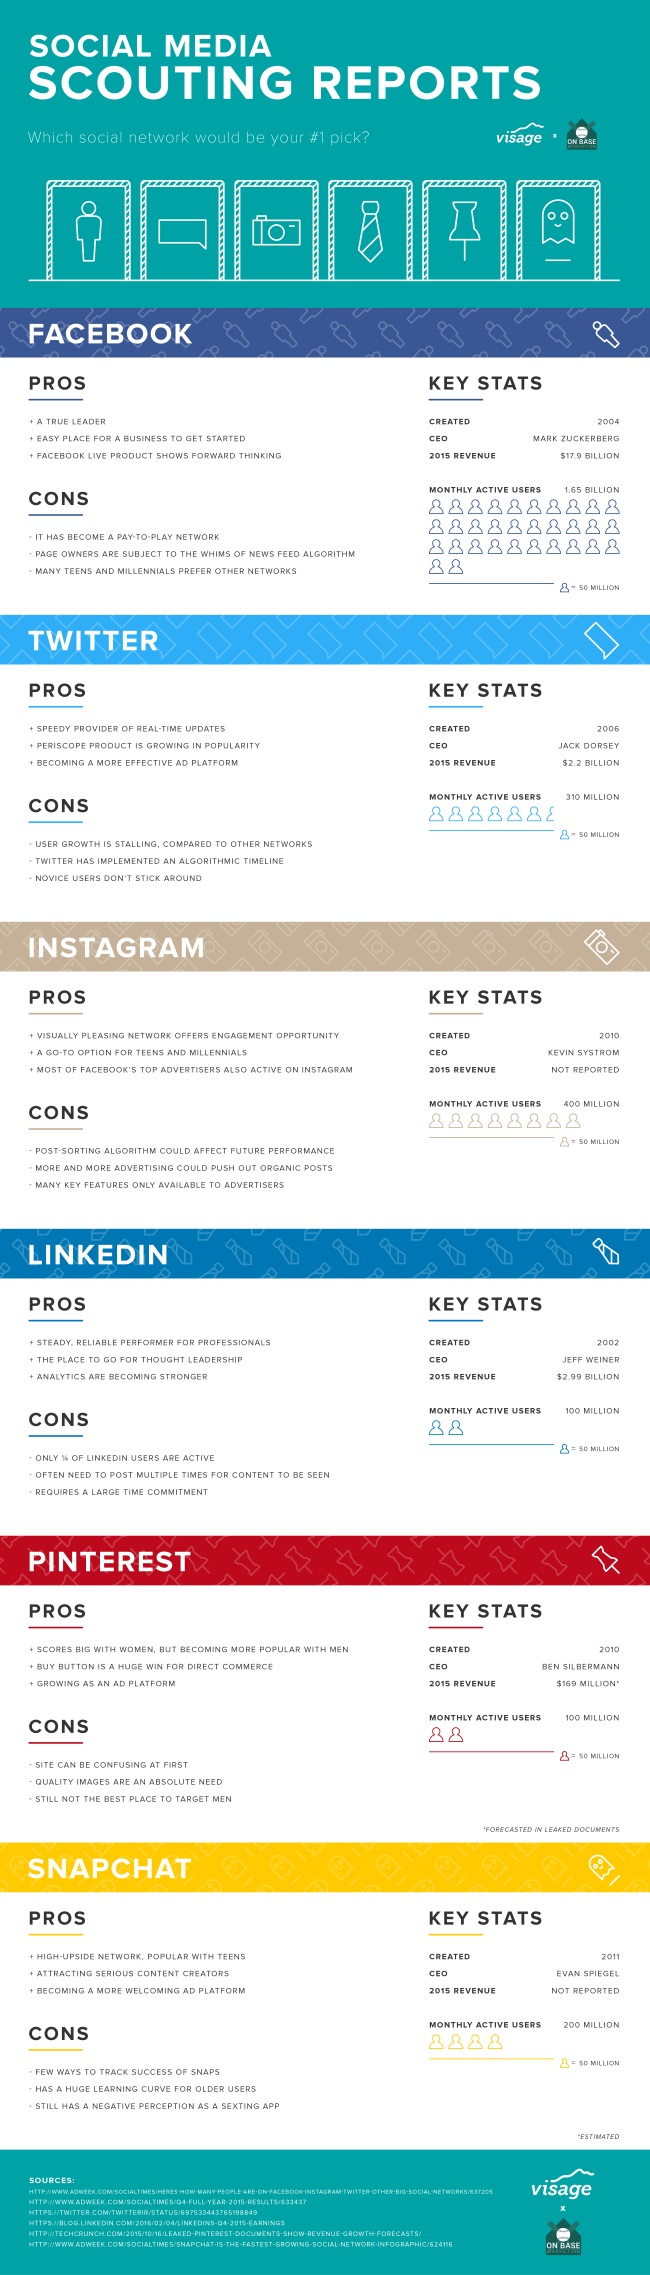 pros-cons-social-networks-infographic